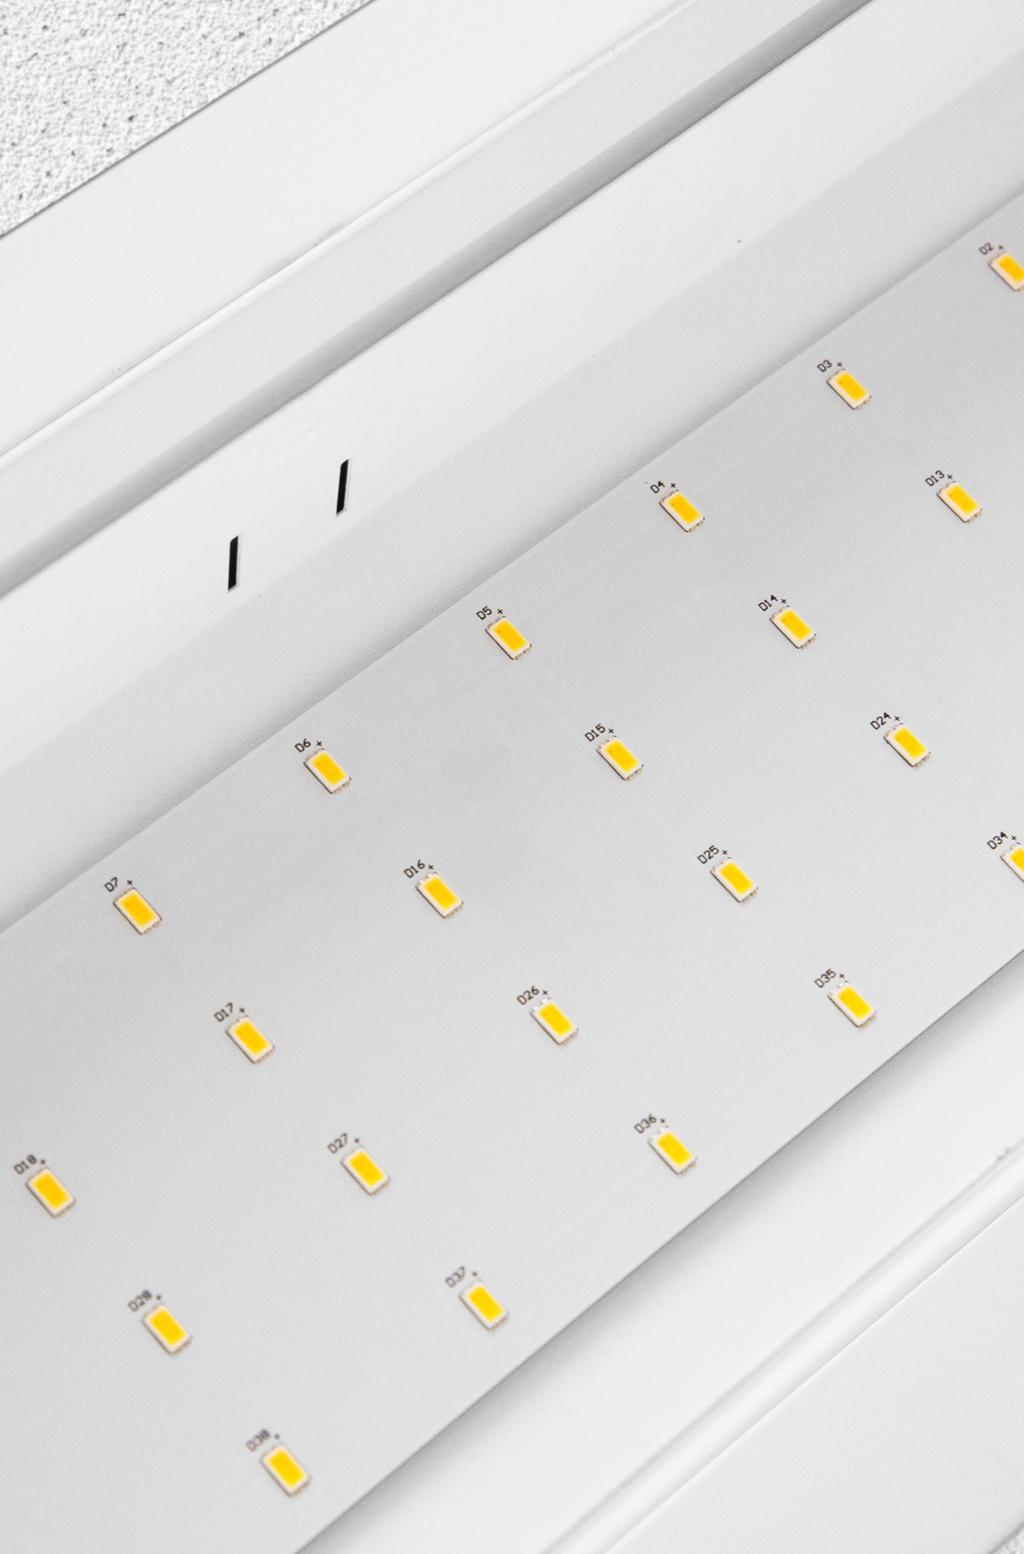 Light Years Ahead Finelite has formulated LED illumination that delivers 90% of initial